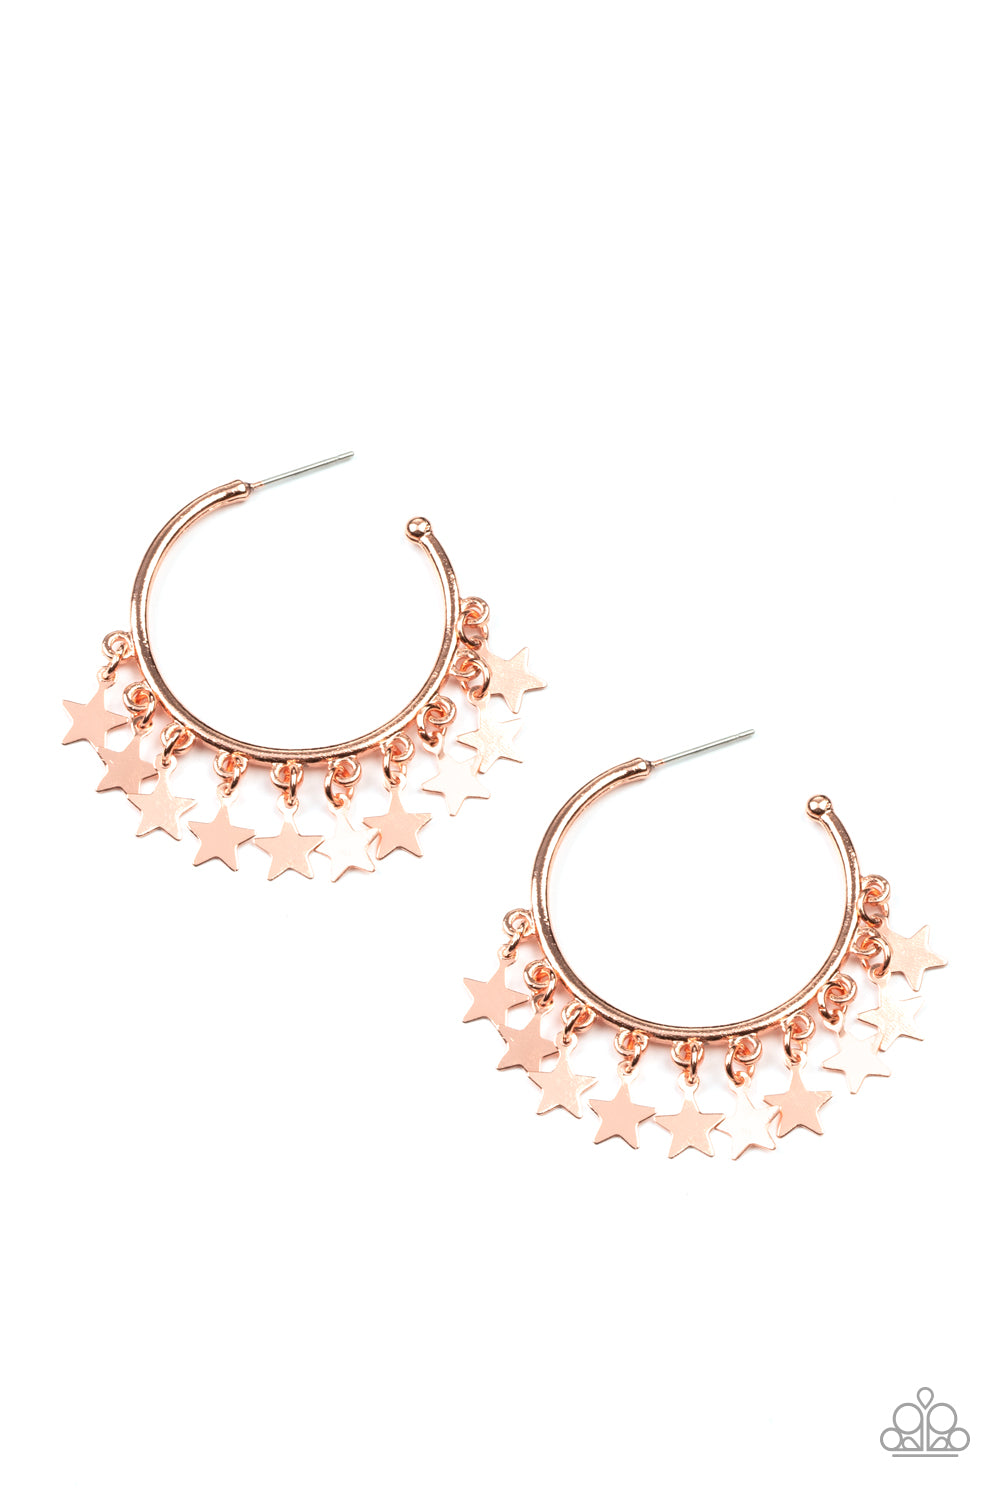 Paparazzi - Happy Independence Day - Copper Earrings